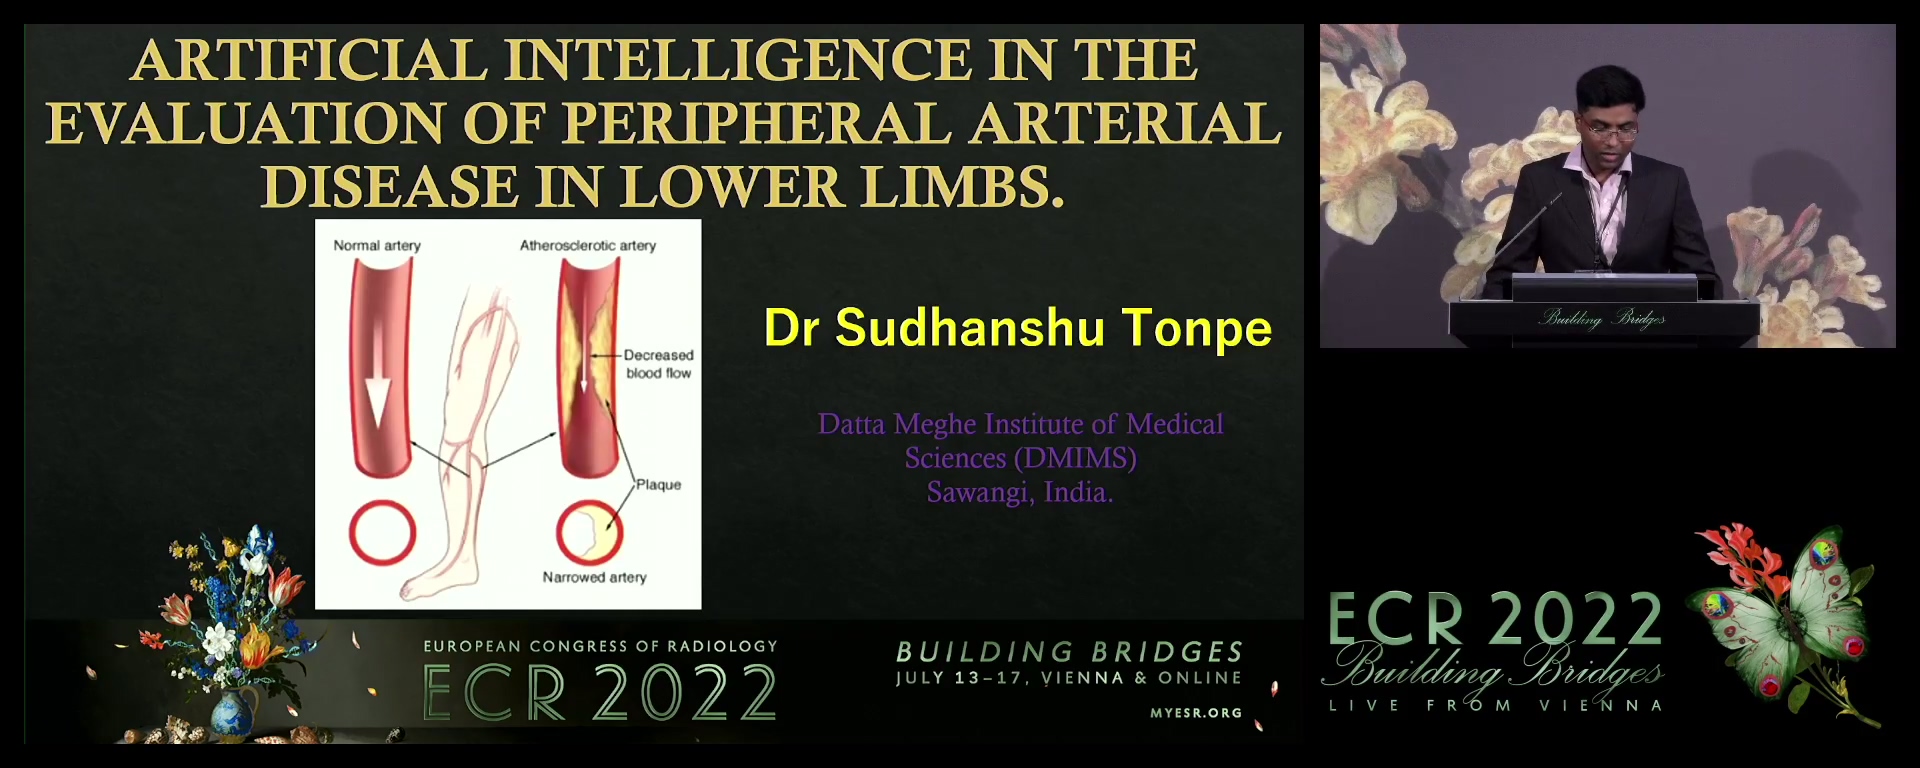 Artificial intelligence in the evaluation of peripheral arterial disease in lower limbs - Sudhanshu Sunil Tonpe, NAGPUR / IN